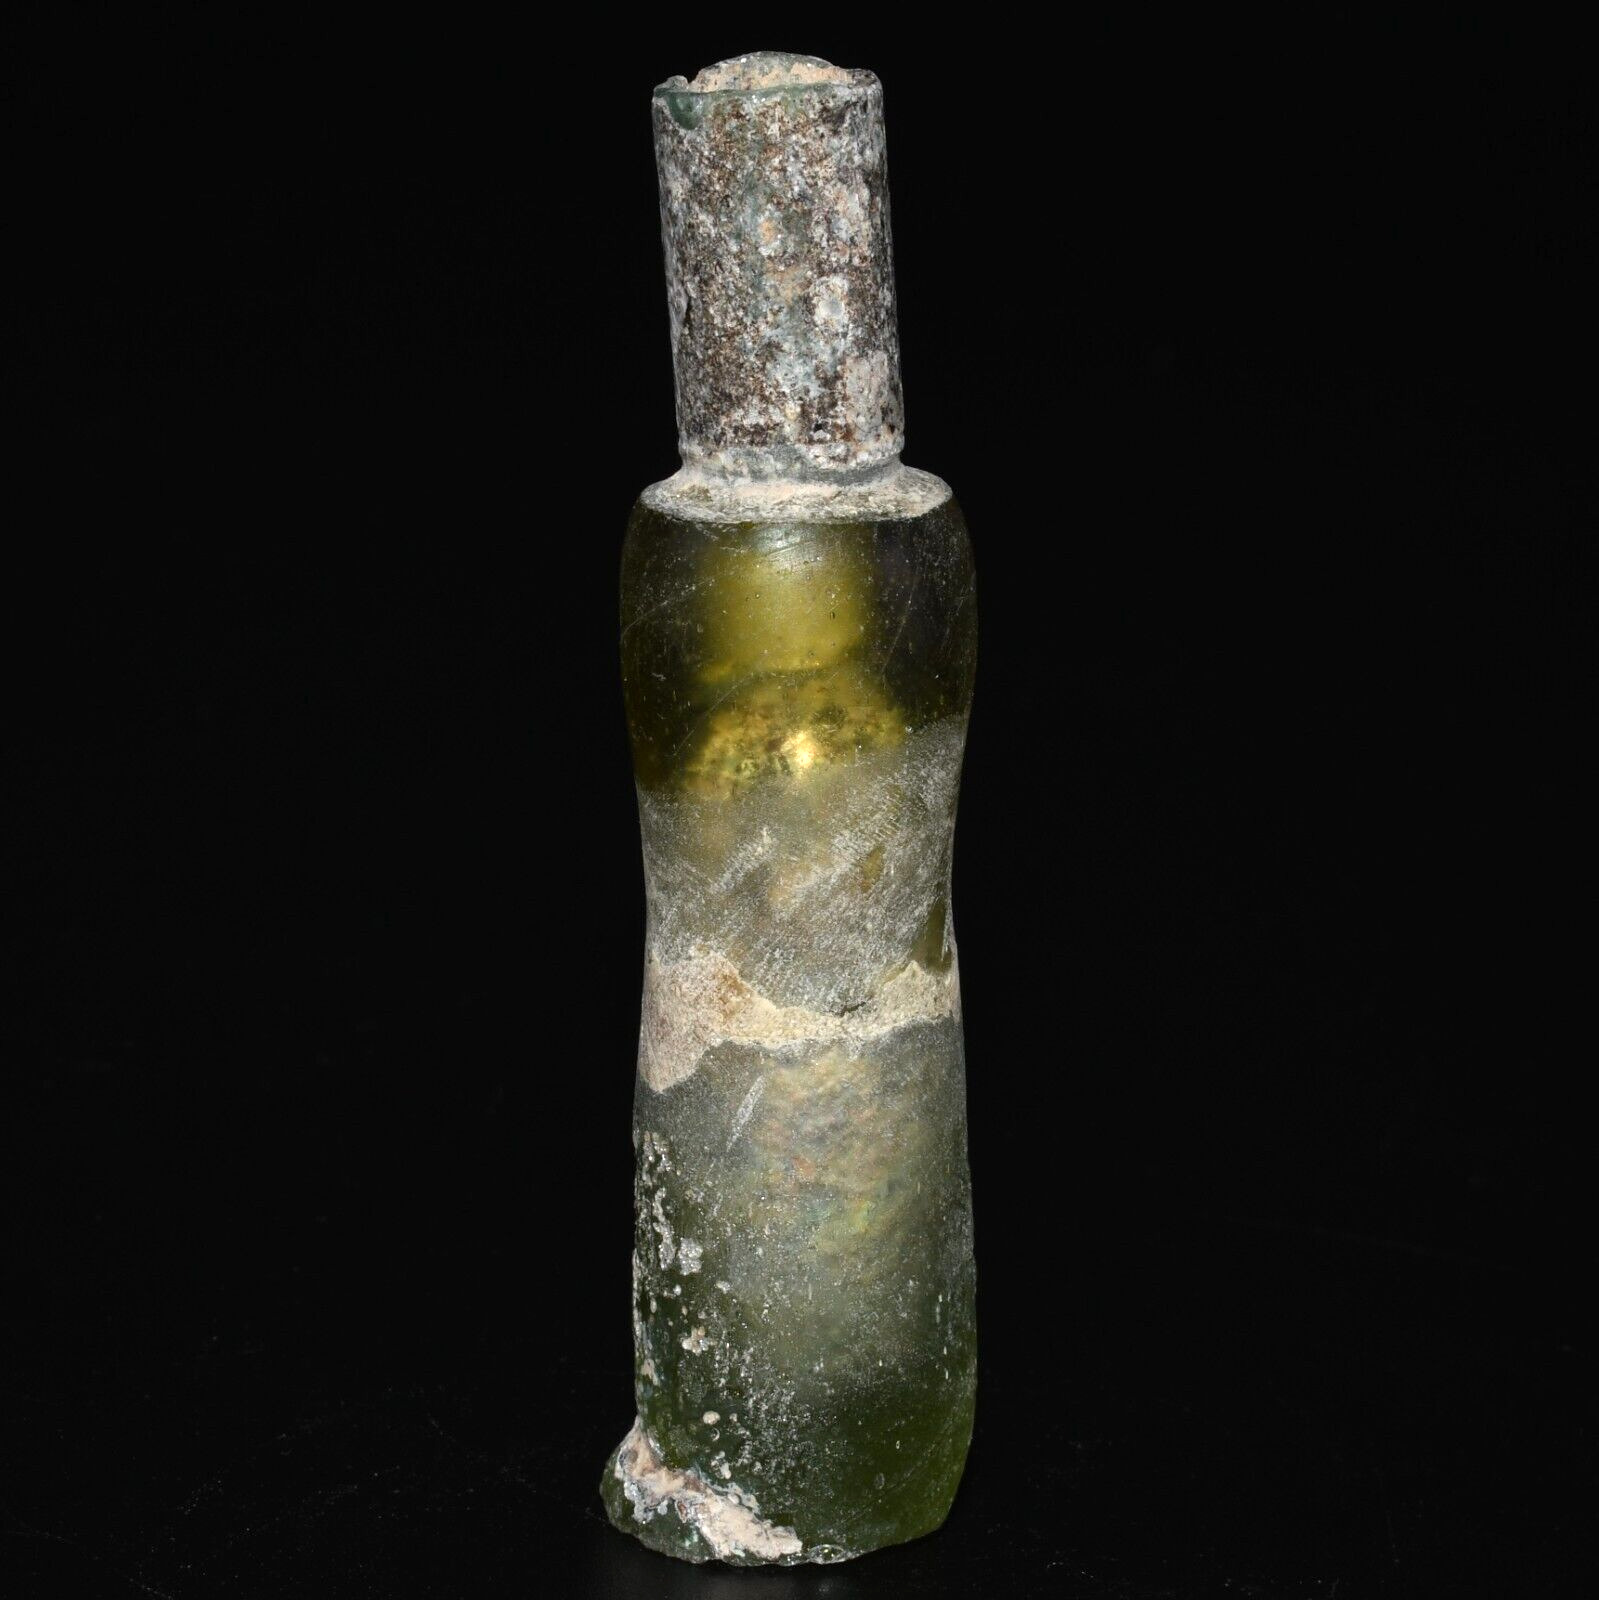 Genuine Ancient Roman Glass Bottle with Green Patina Circa 1st - 3rd Century AD